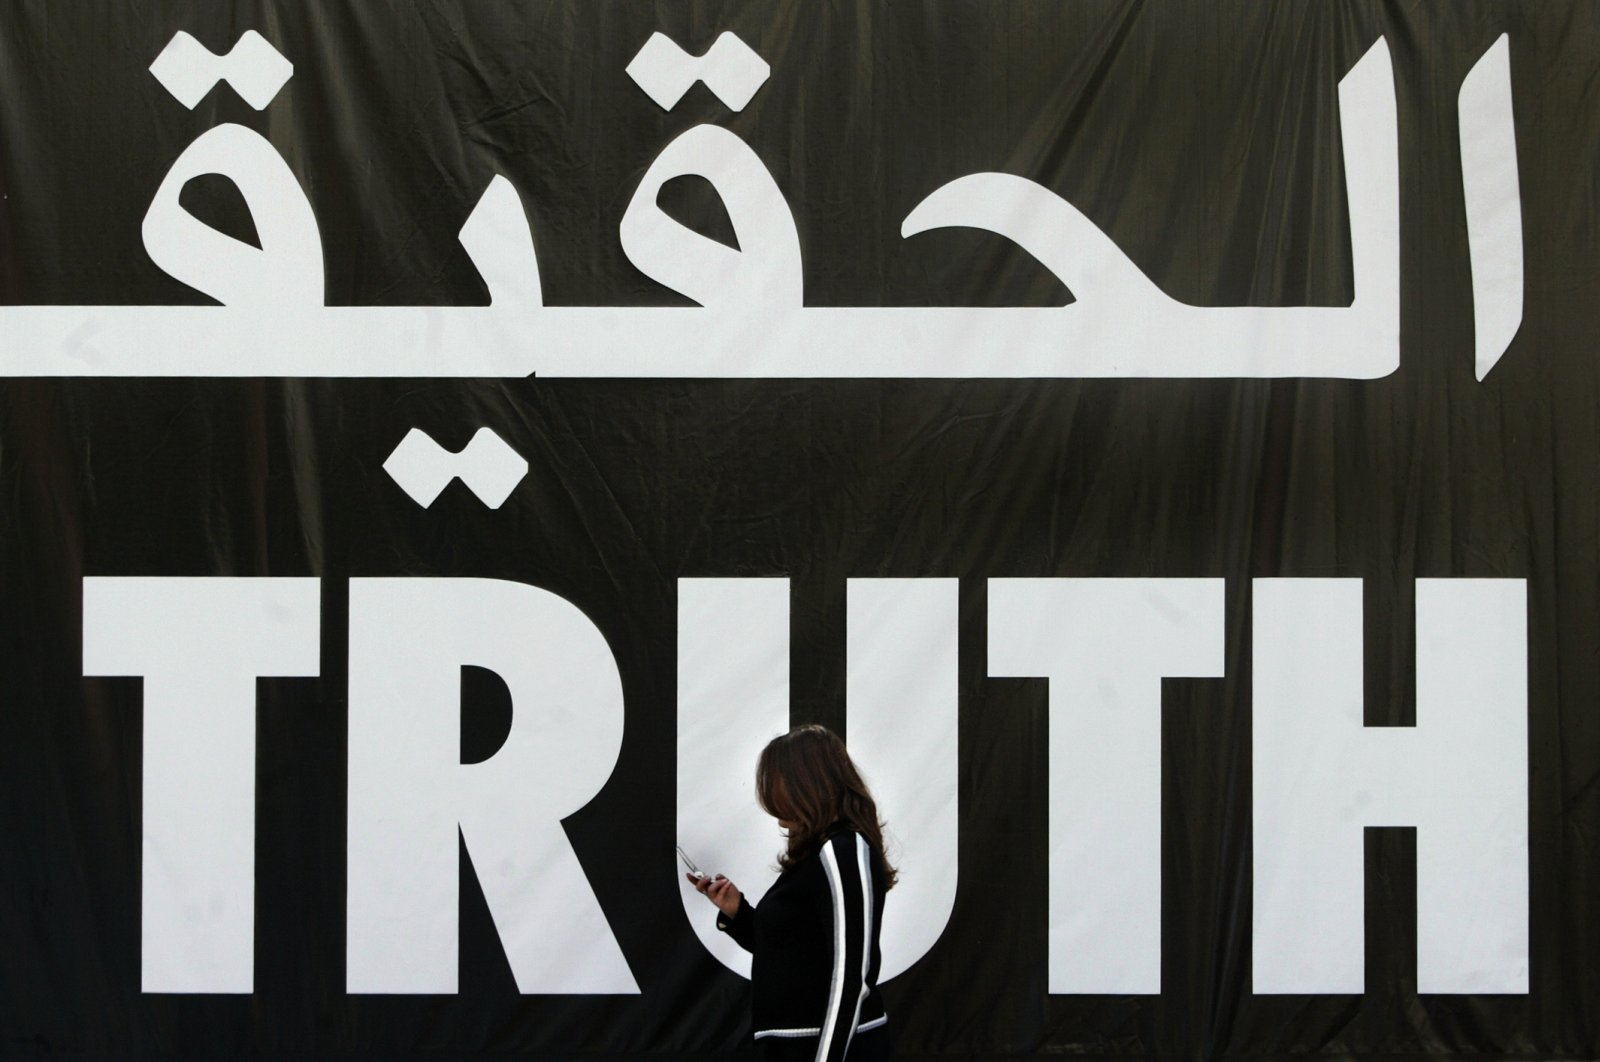 A Lebanese woman uses her mobile phone as she walks past a giant banner reading "truth" in Arabic and English, Beirut, Apr. 5, 2005. (AFP Photo)